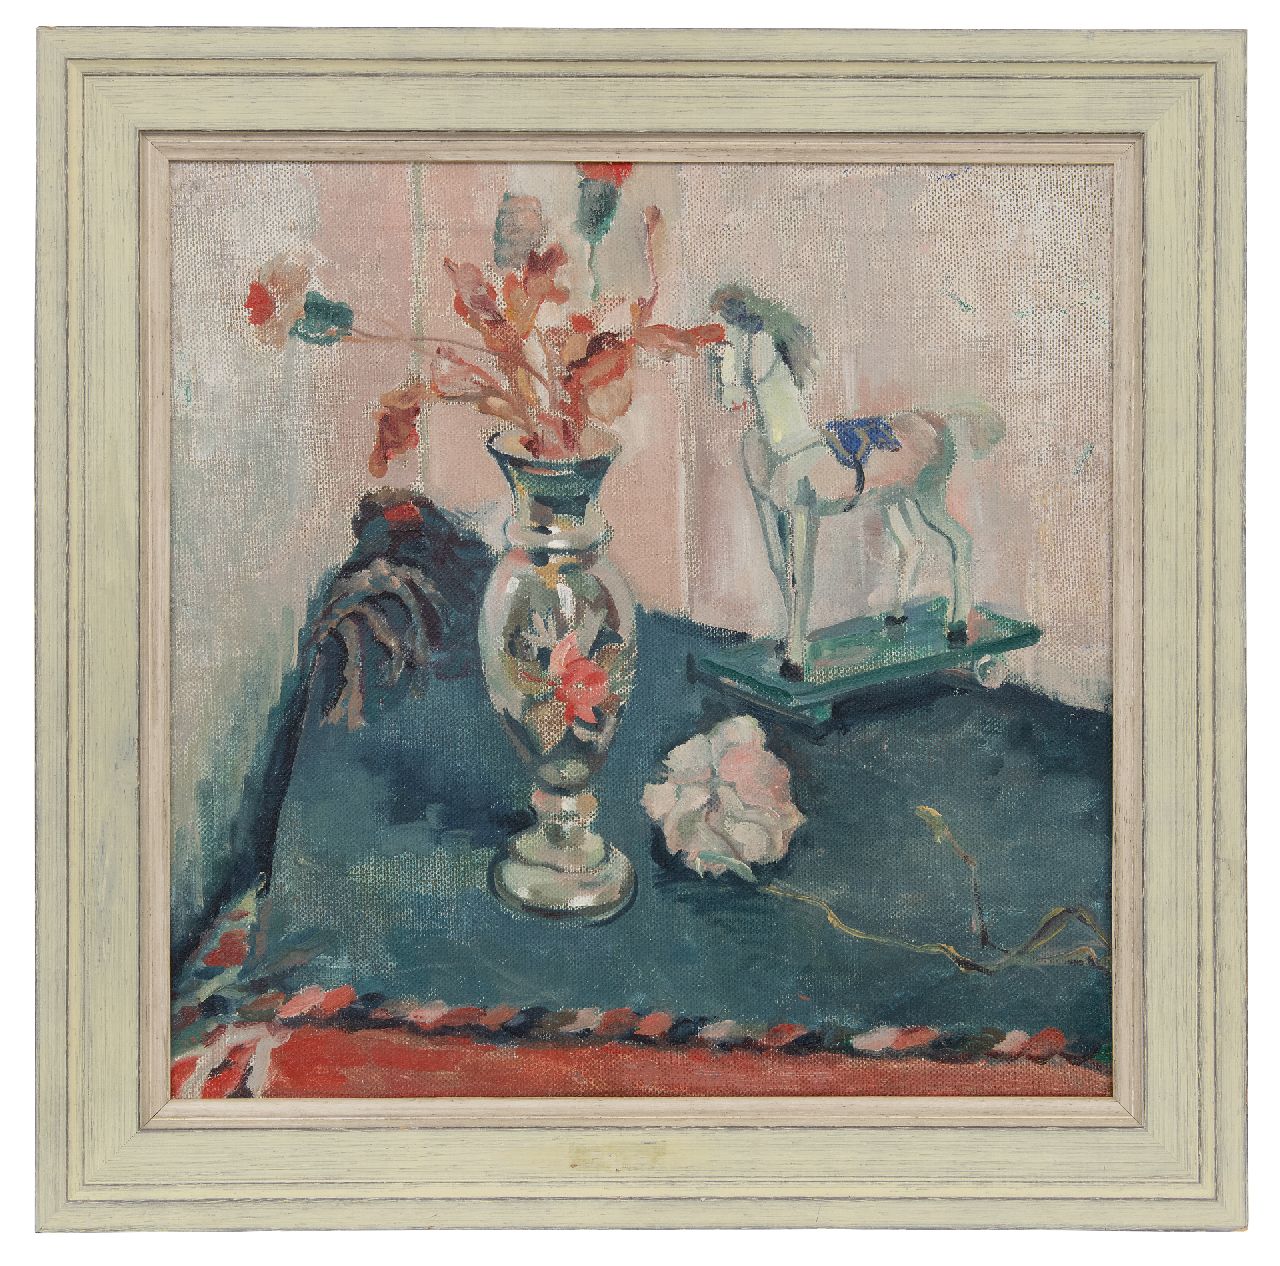 Martens G.G.  | Gijsbert 'George' Martens | Paintings offered for sale | Still life with flowers and toy horse, oil on canvas 50.5 x 50.3 cm, signed reverse on stretcher